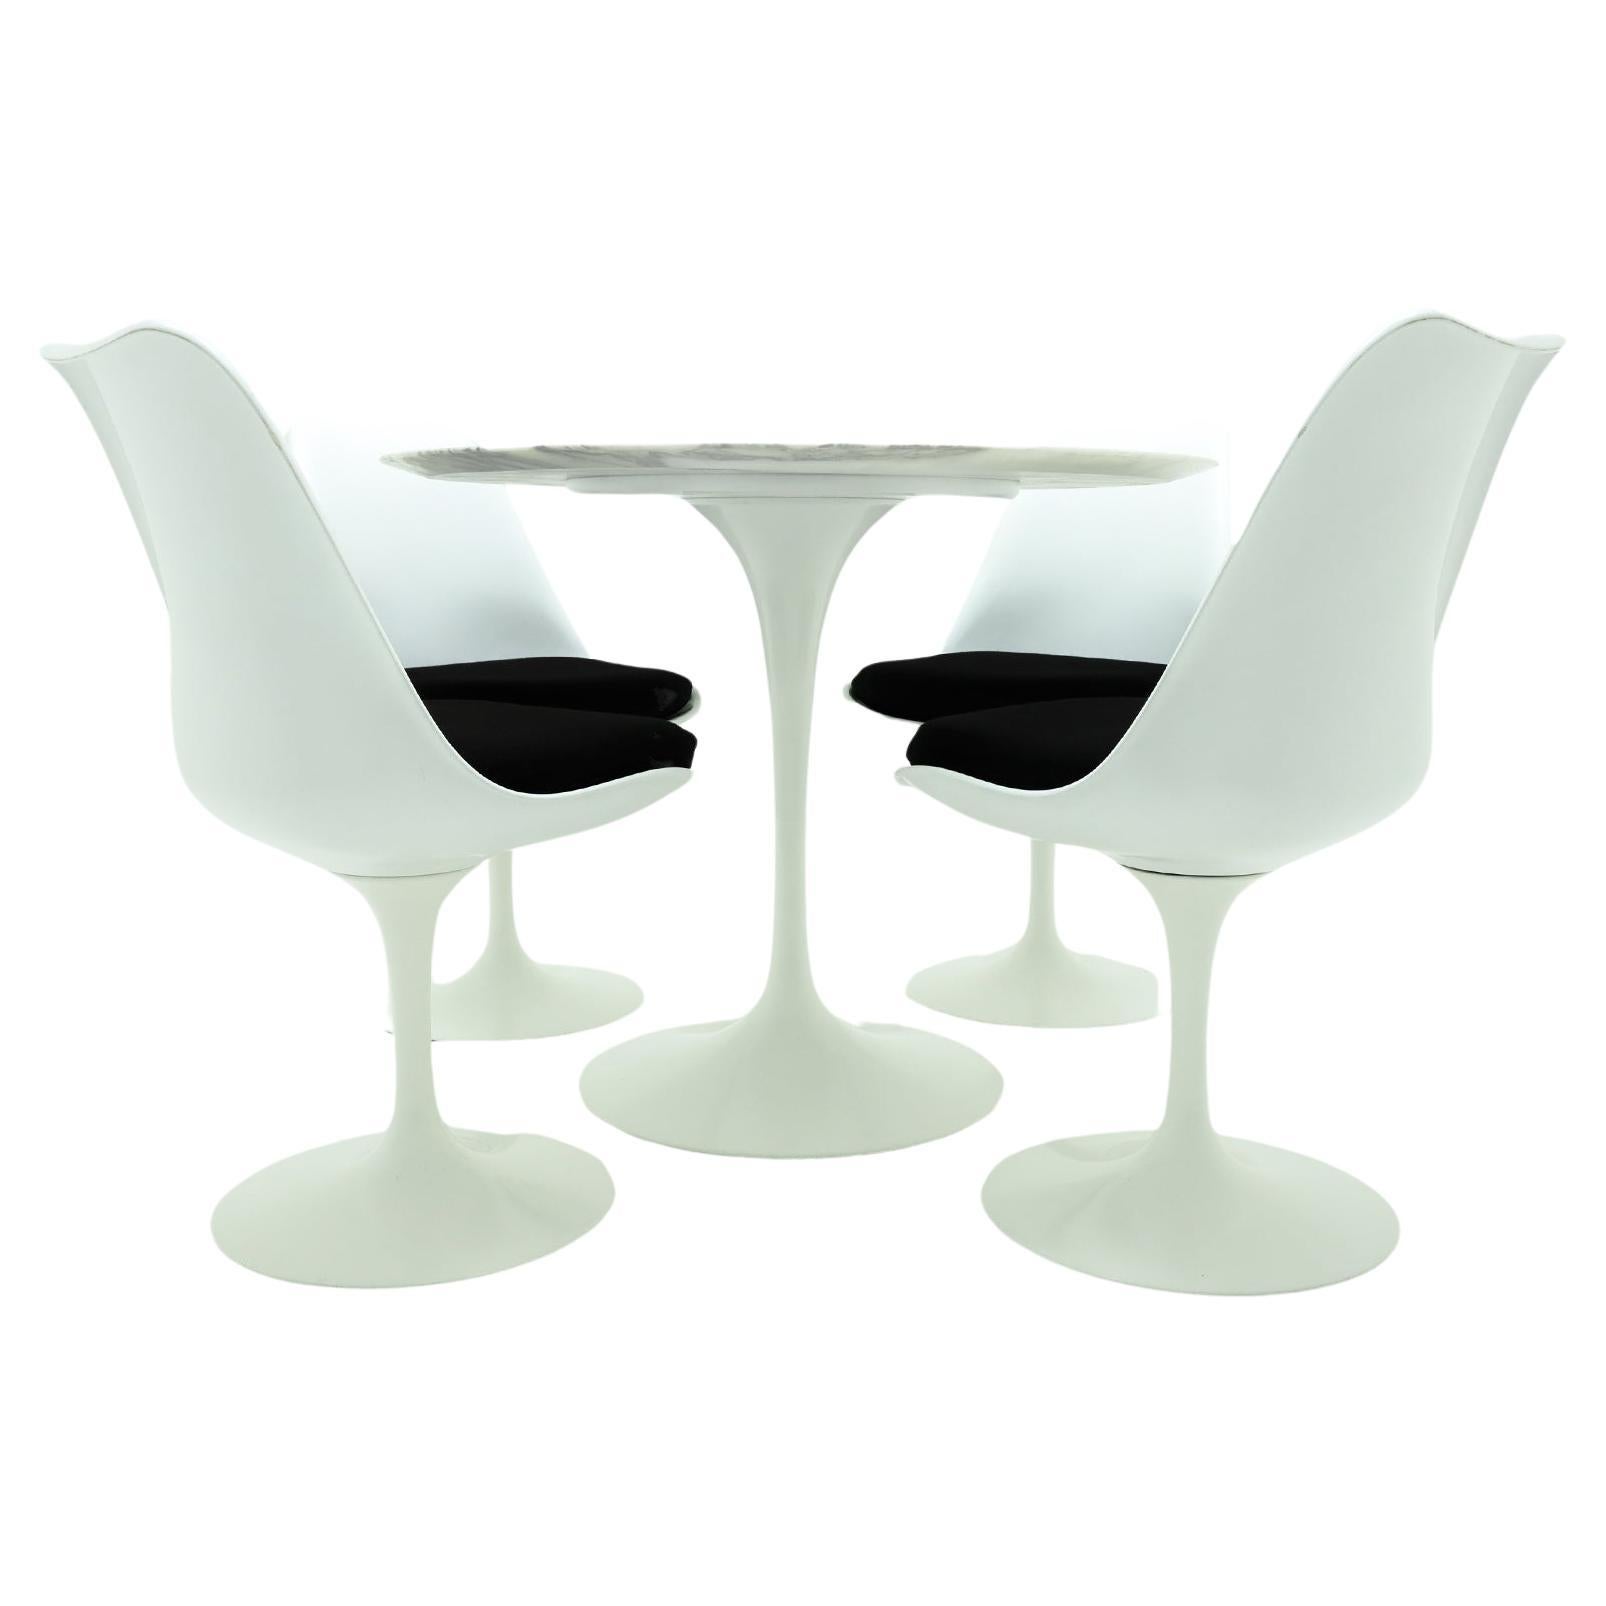 White Knoll, Saarinen Calacatta marble tulip dining table with 4 matching chairs